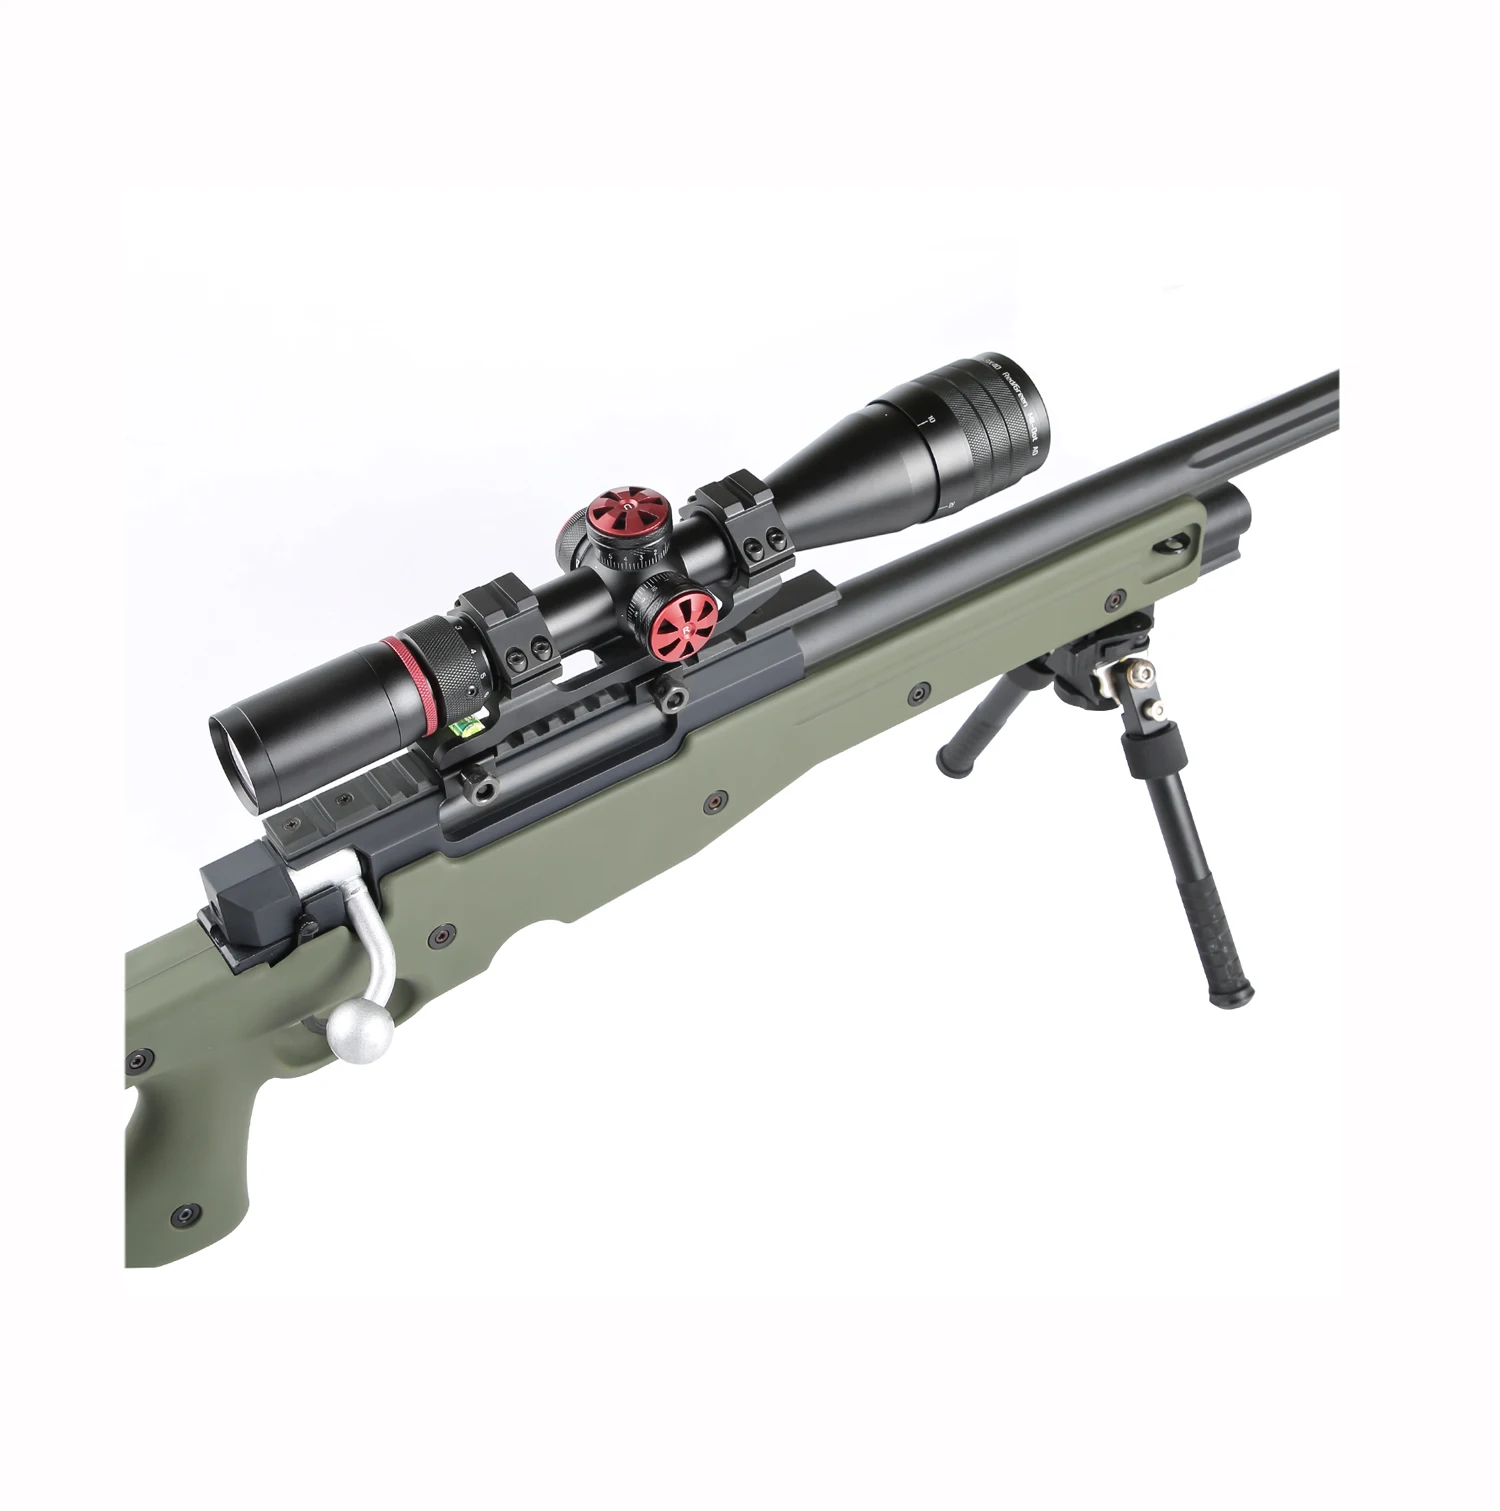 

Hunting scope for airgun long range T-EAGLE SR 3-9X40 AOIR Riflescope shockproof weapons scopes & accessories